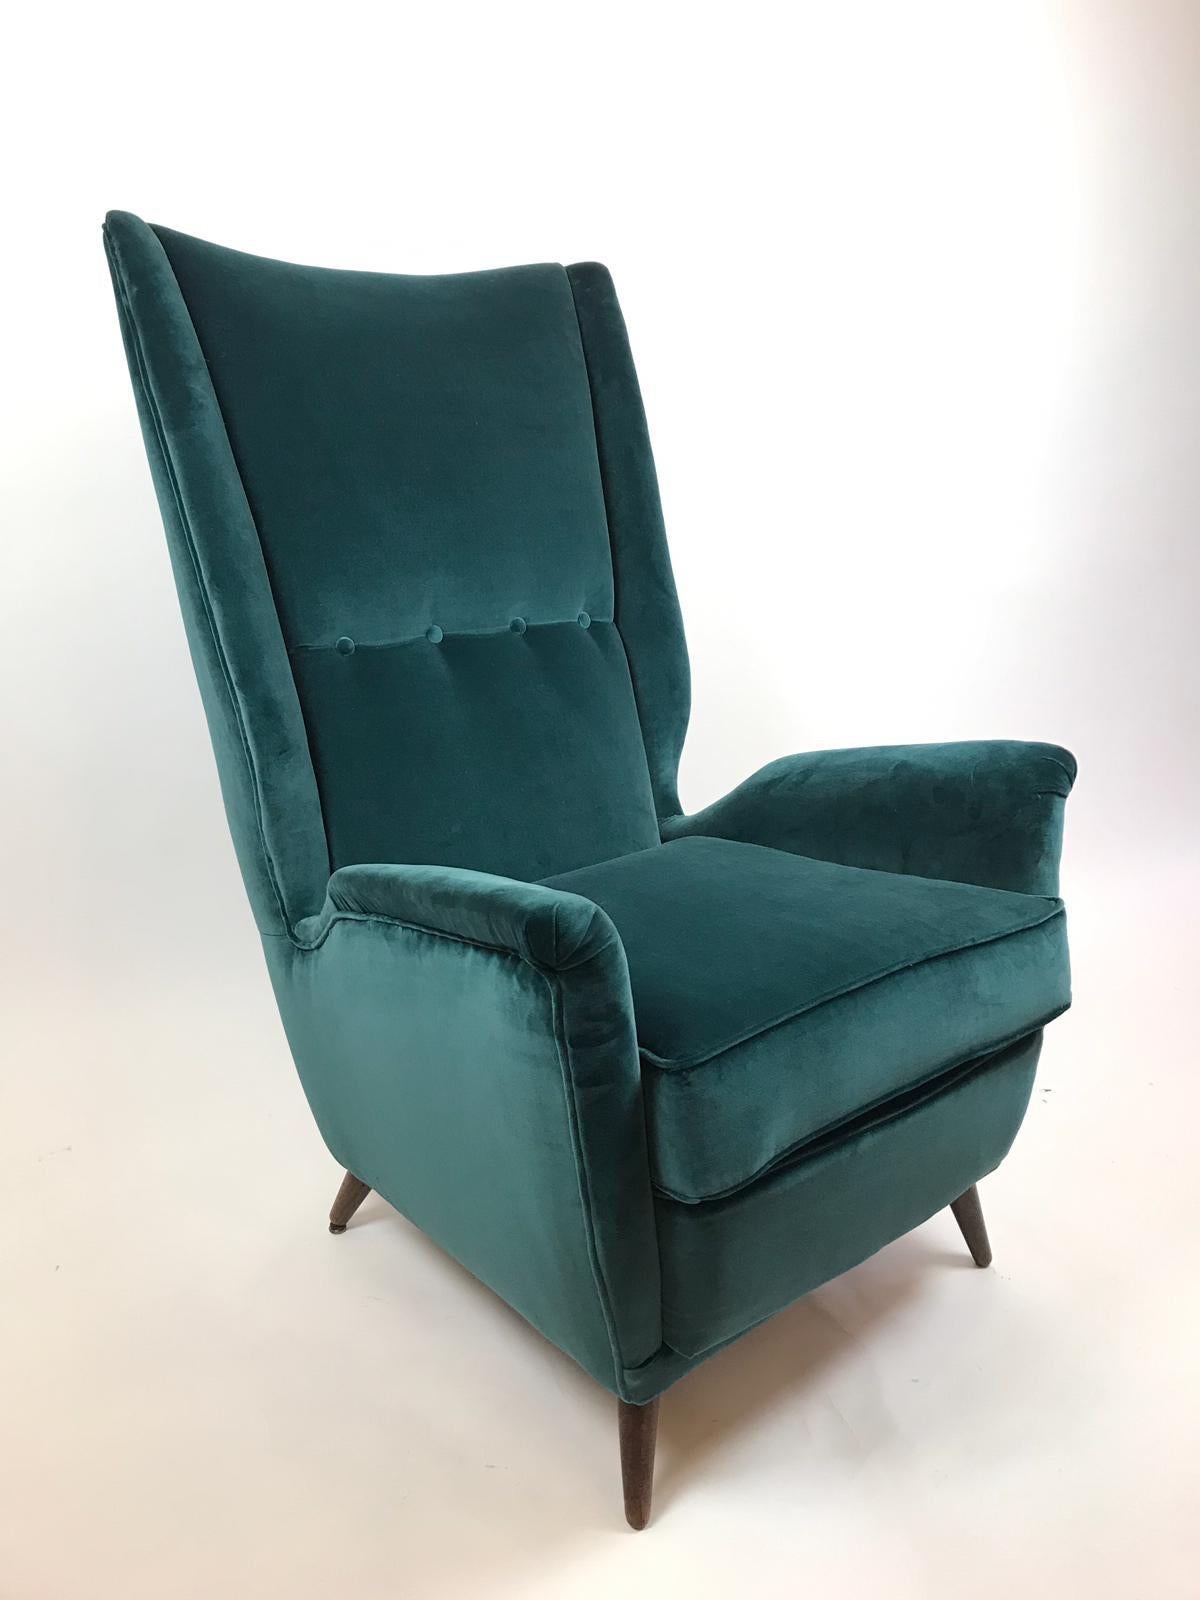 Gio Ponti Pair of High Back Armchairs Newly Upholstered in Teal Velvet (Handgefertigt)